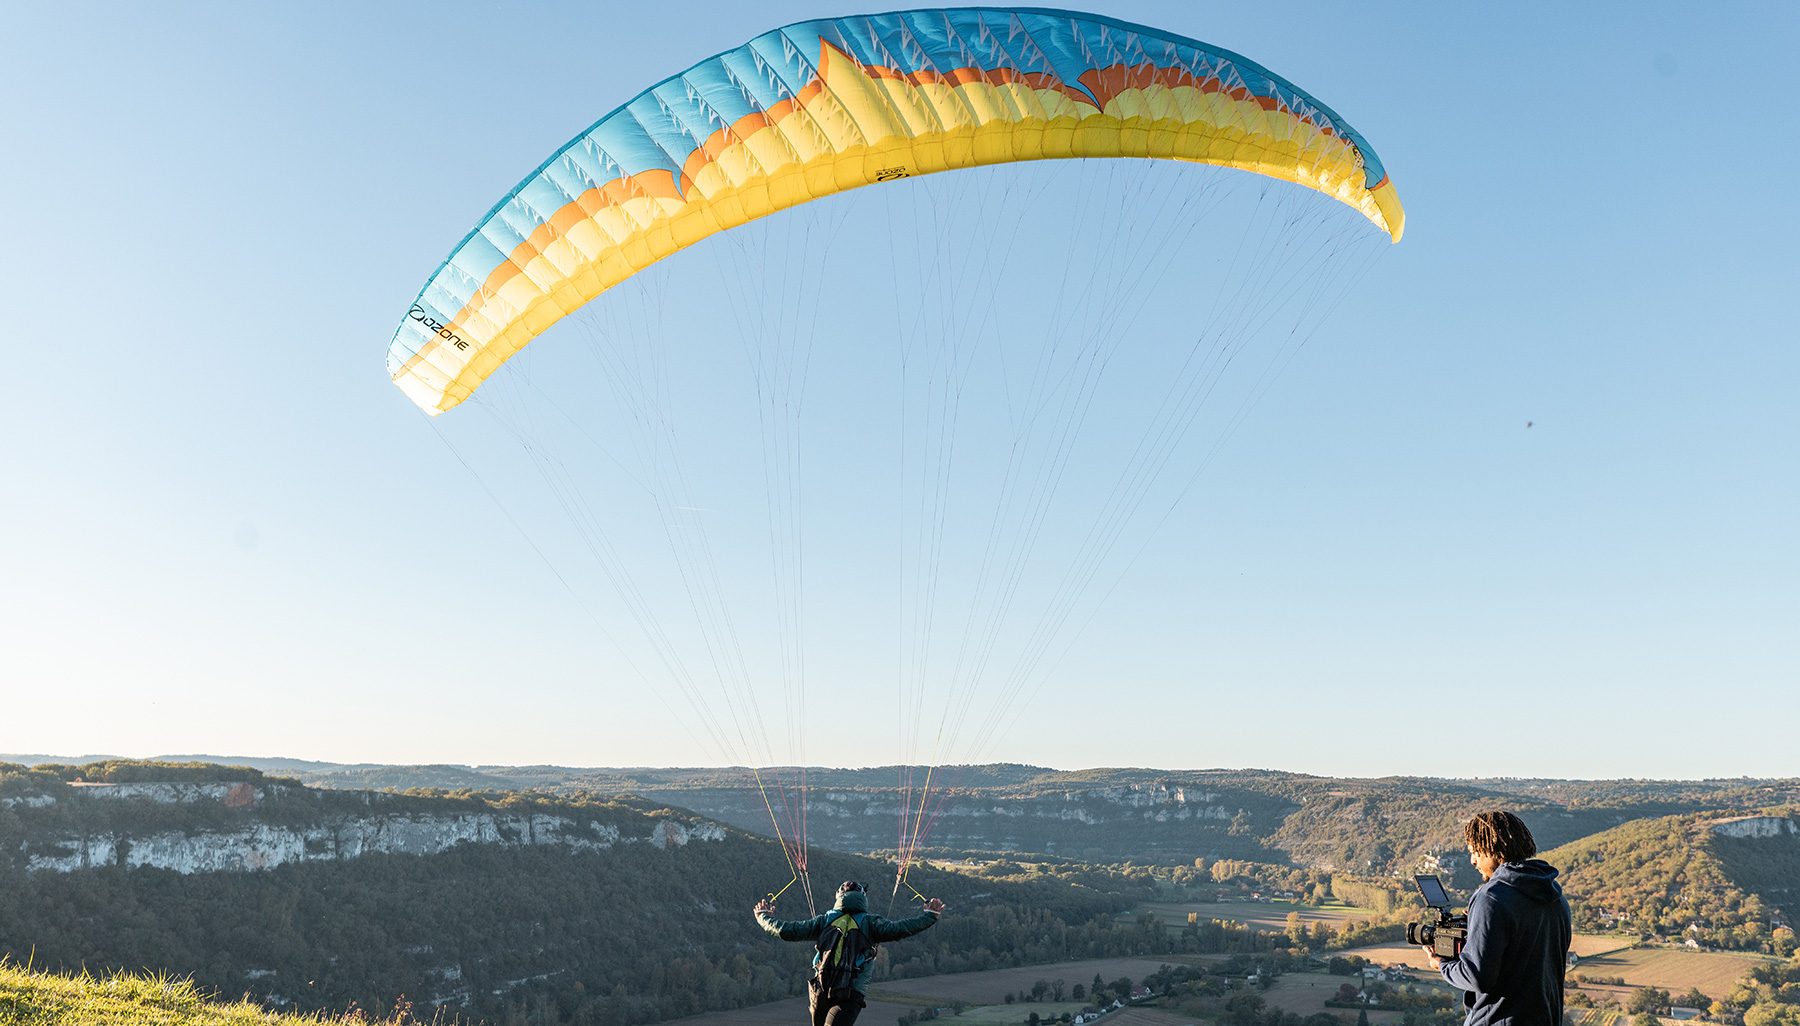 Paragliding at the mounine jump